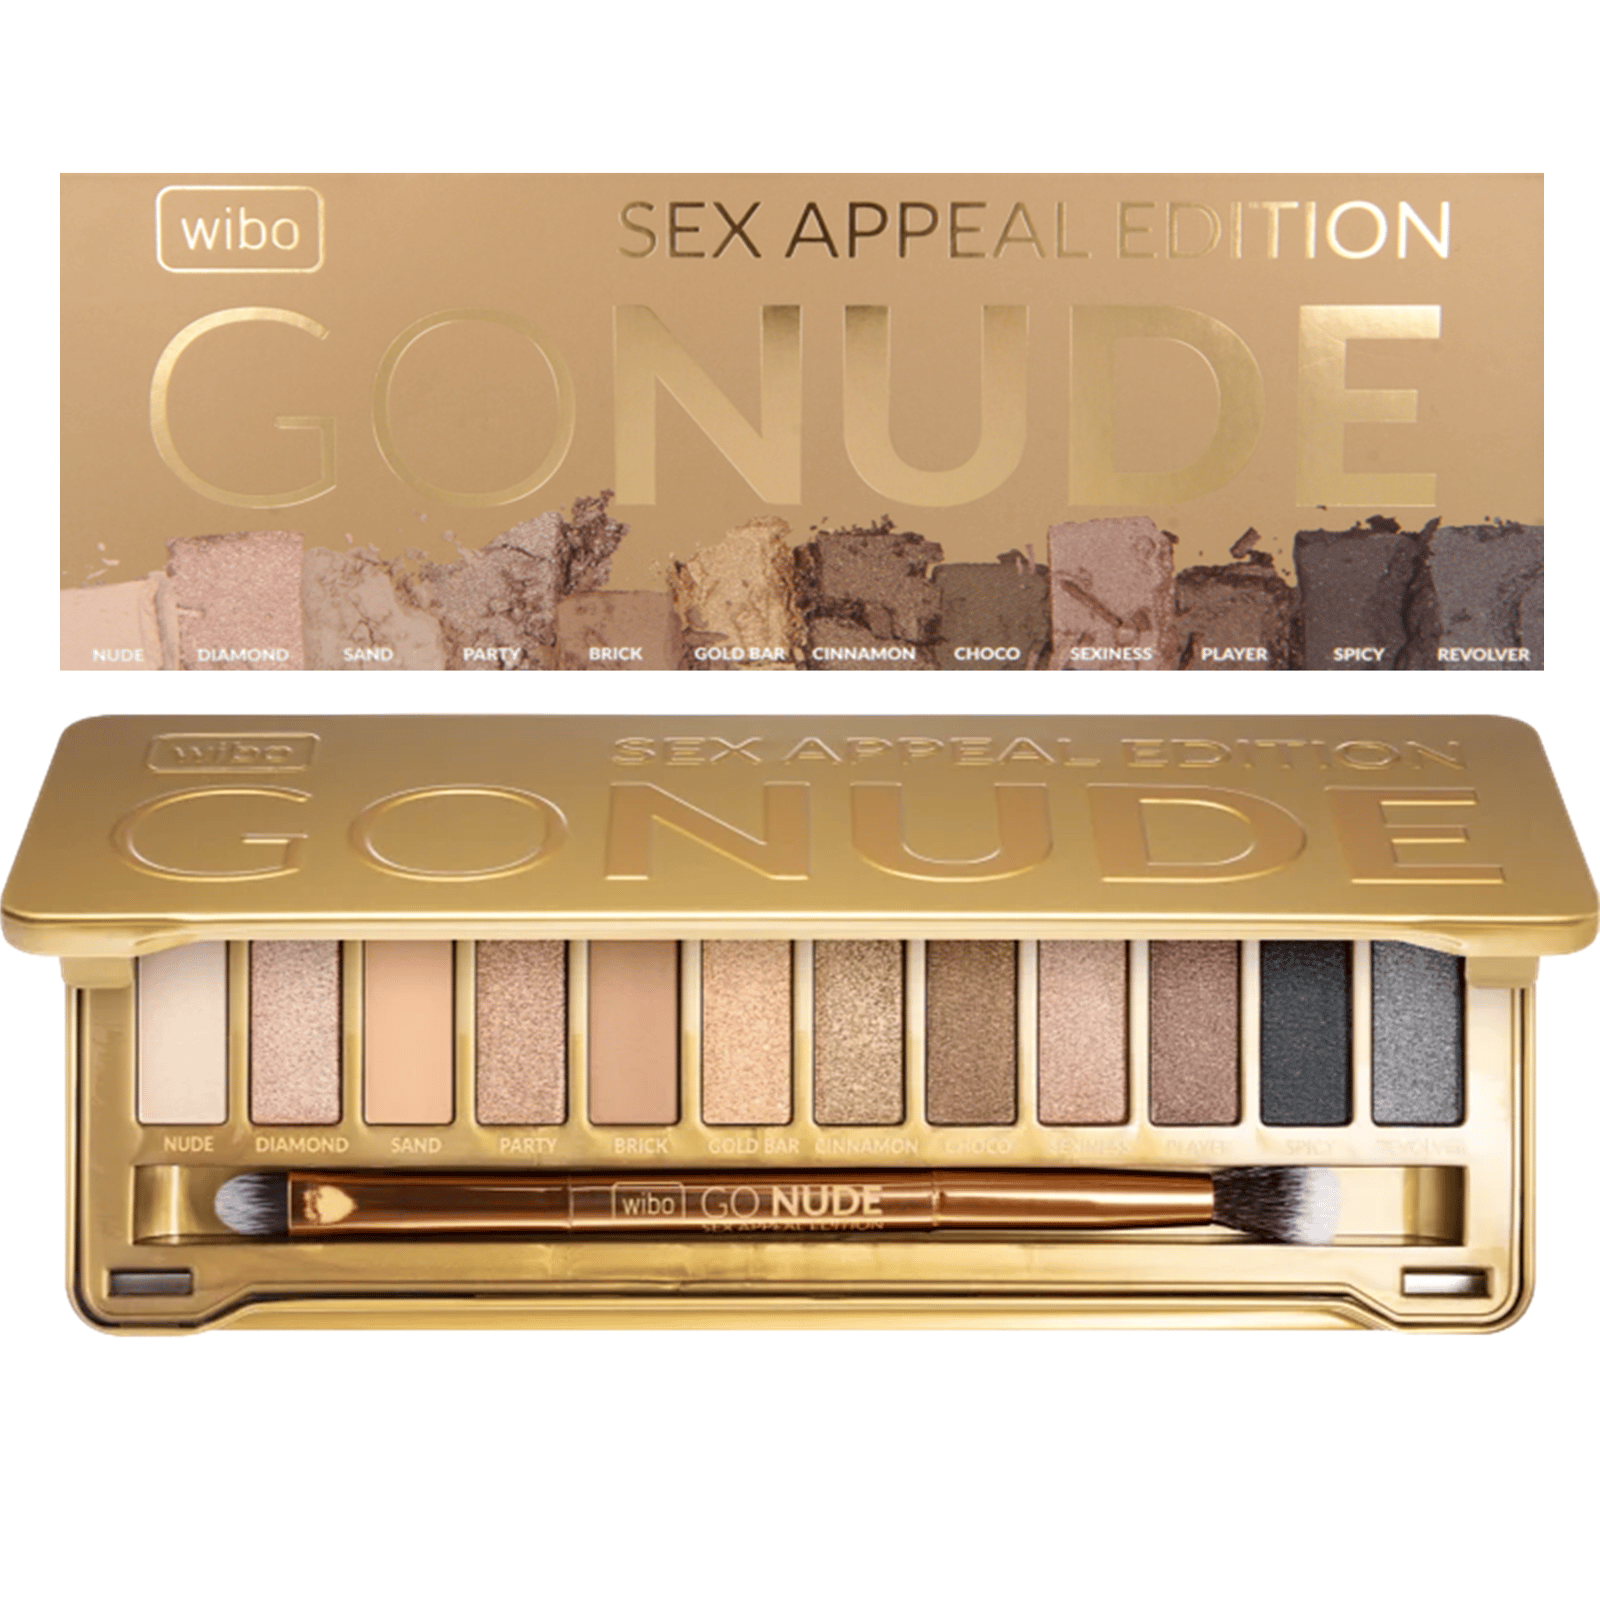 Wibo Go Nude Sex Appeal Edition Eyeshadow Palette 13g (0.45oz)